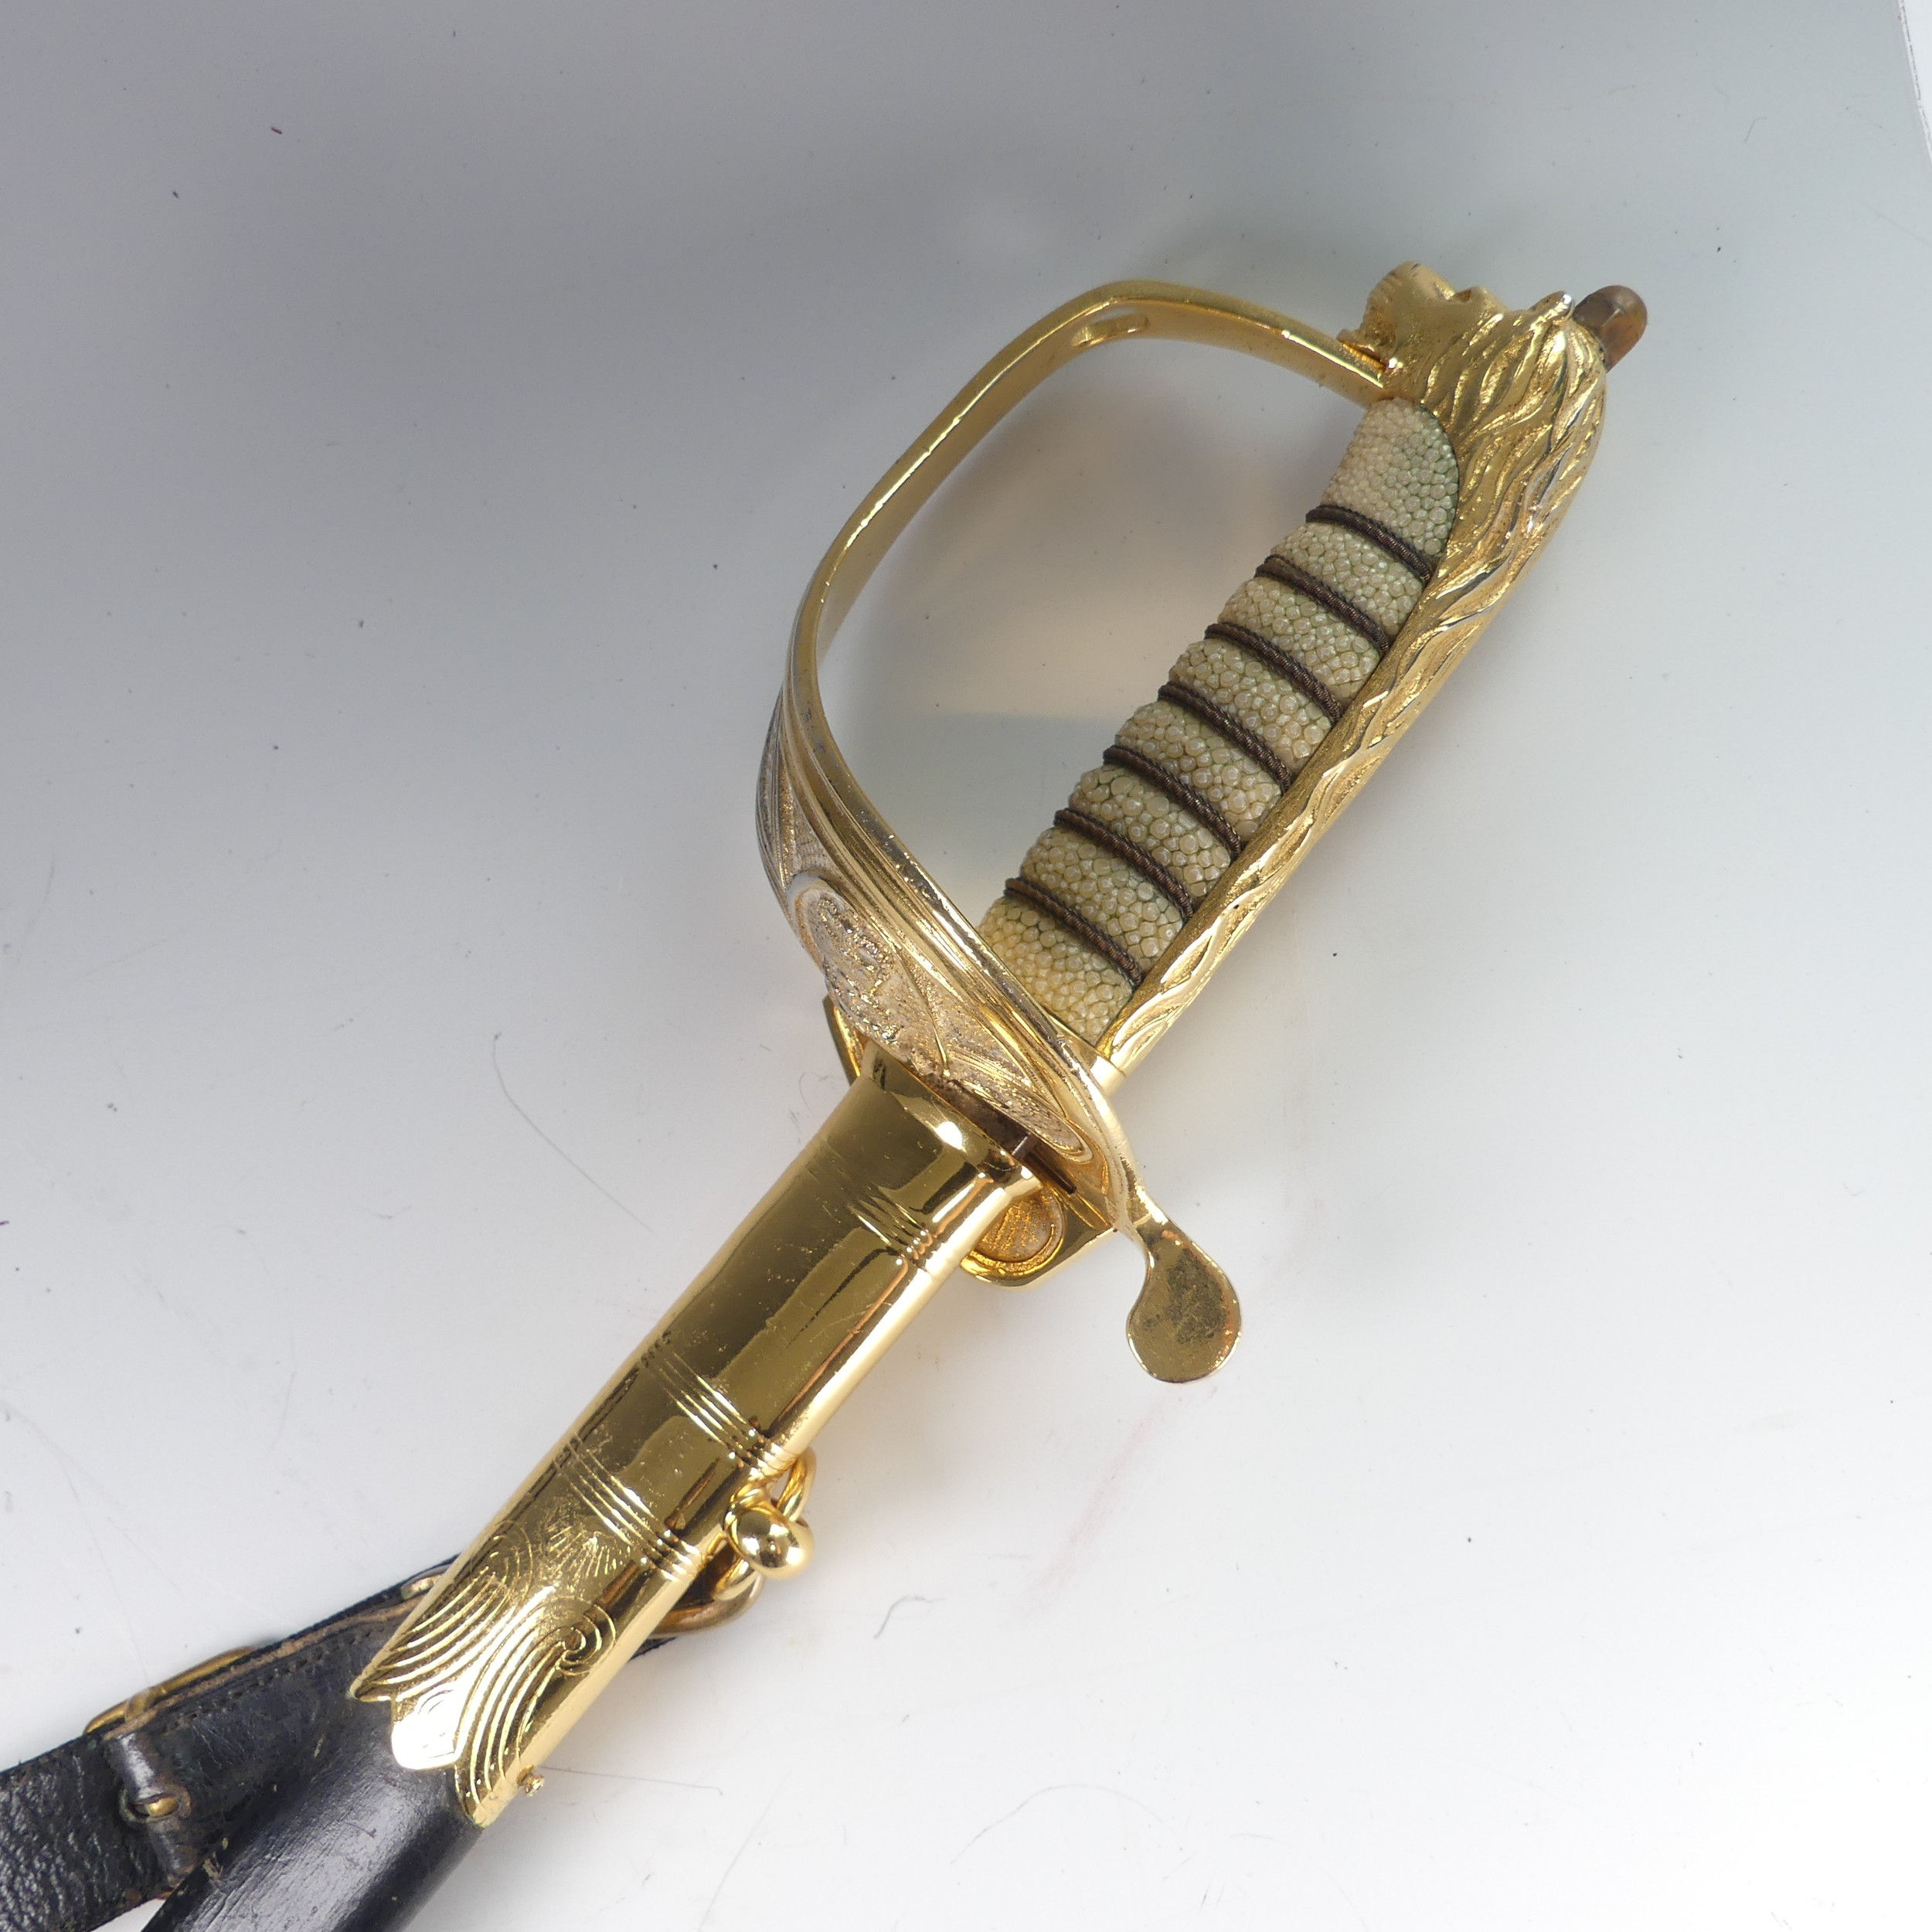 A reproduction 1827 pattern Royal Navy Officers Sword, fullered steel blade etched with insignia, - Image 2 of 10